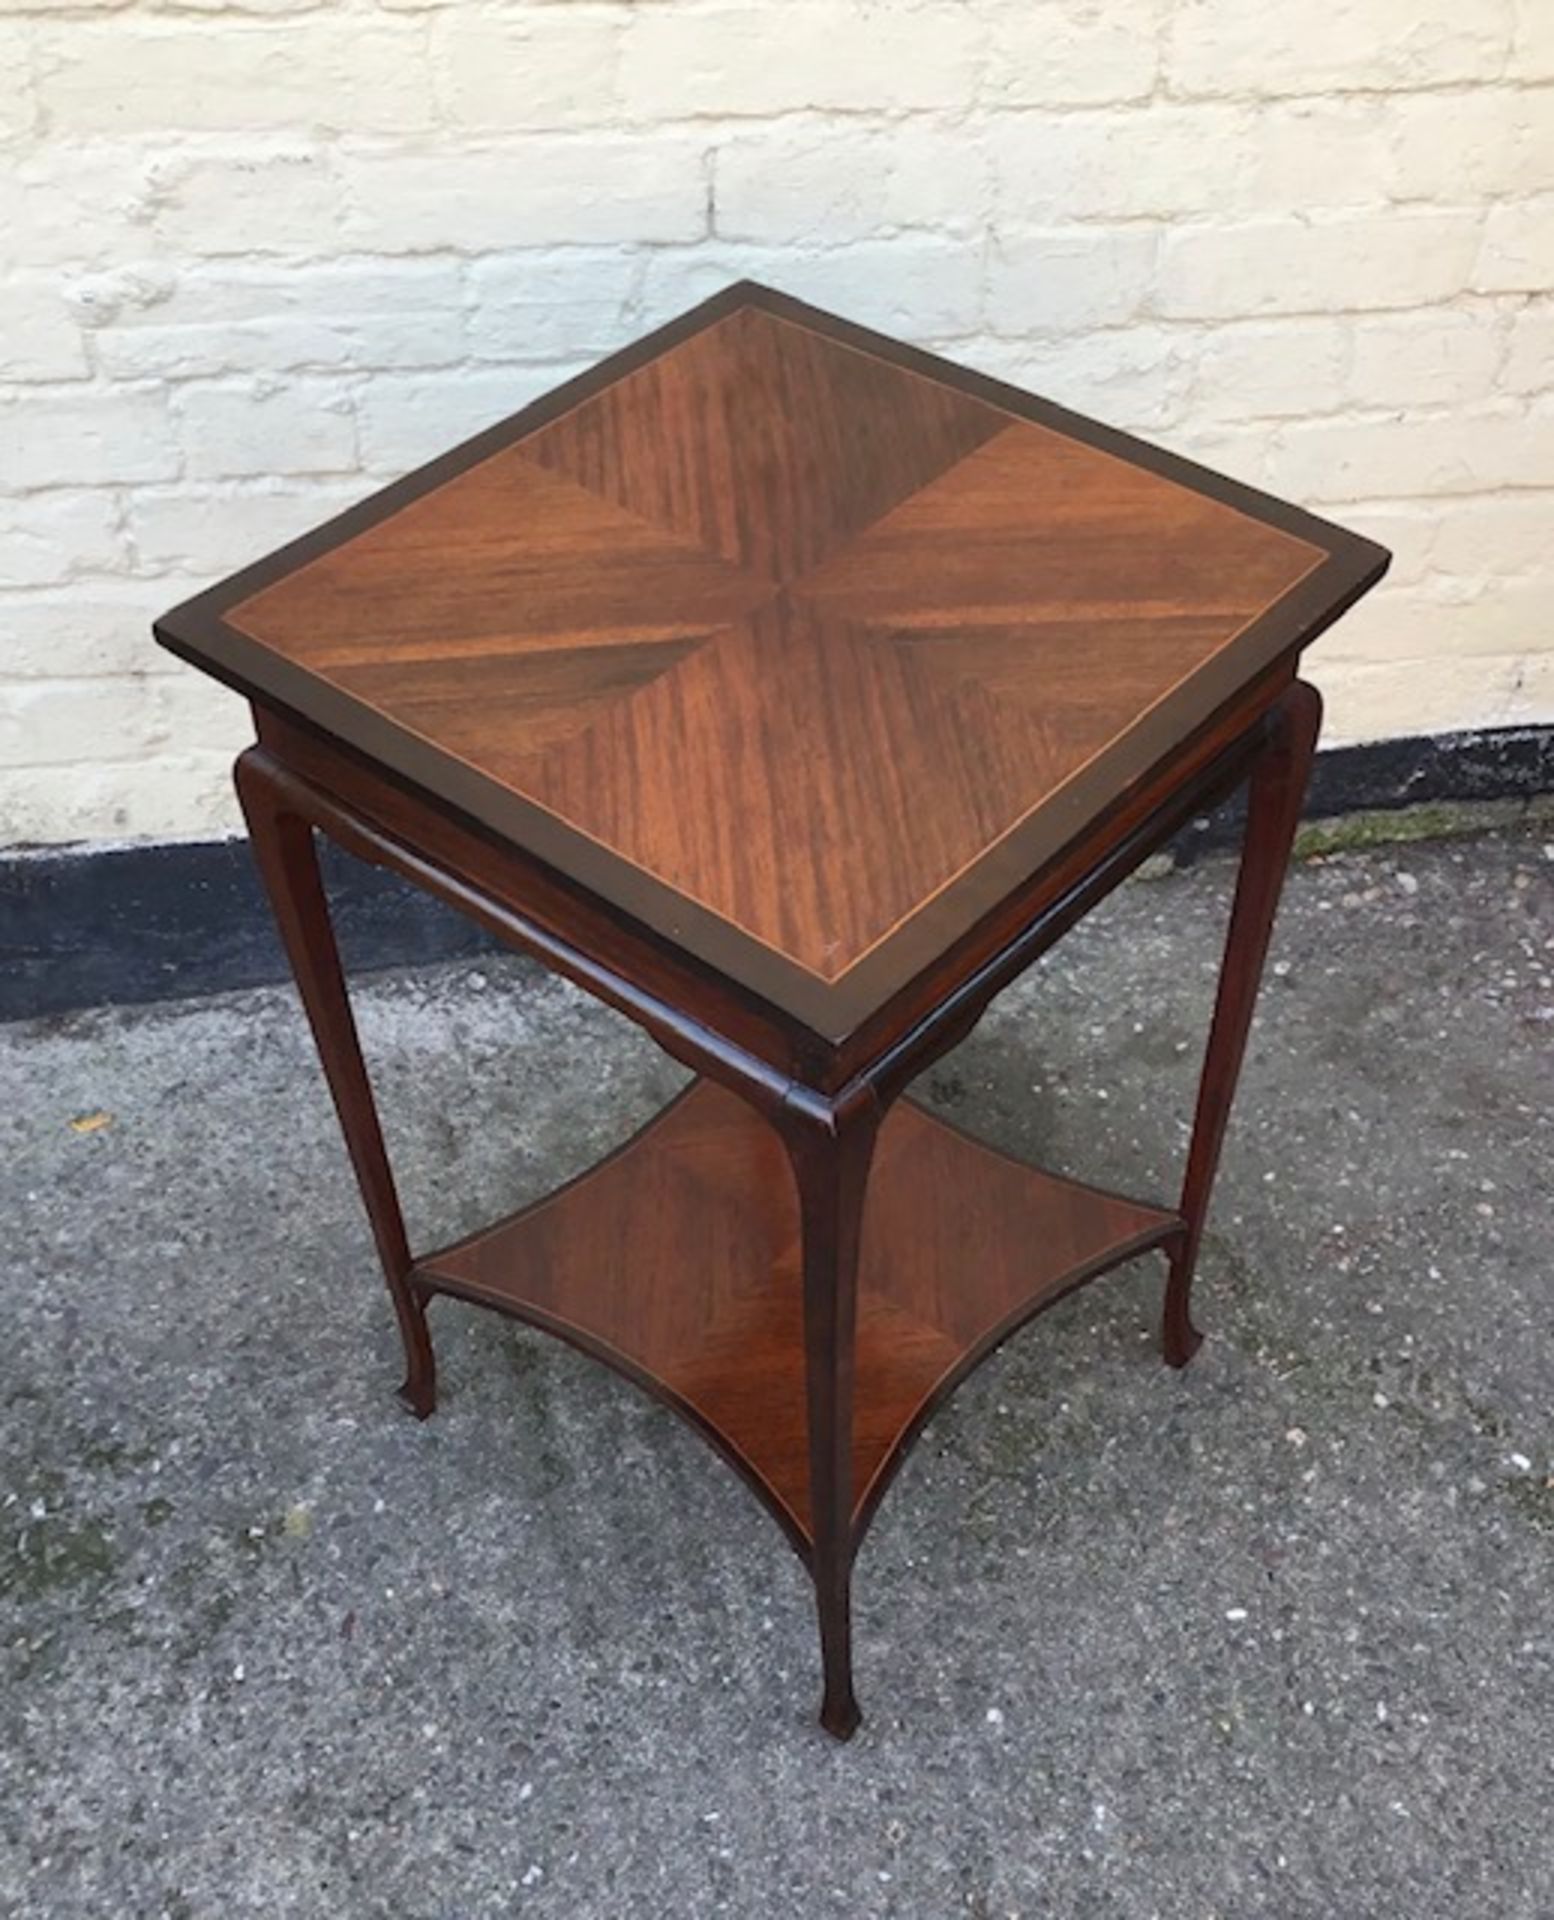 Antique Edwardian square topped occaional table with under teir.